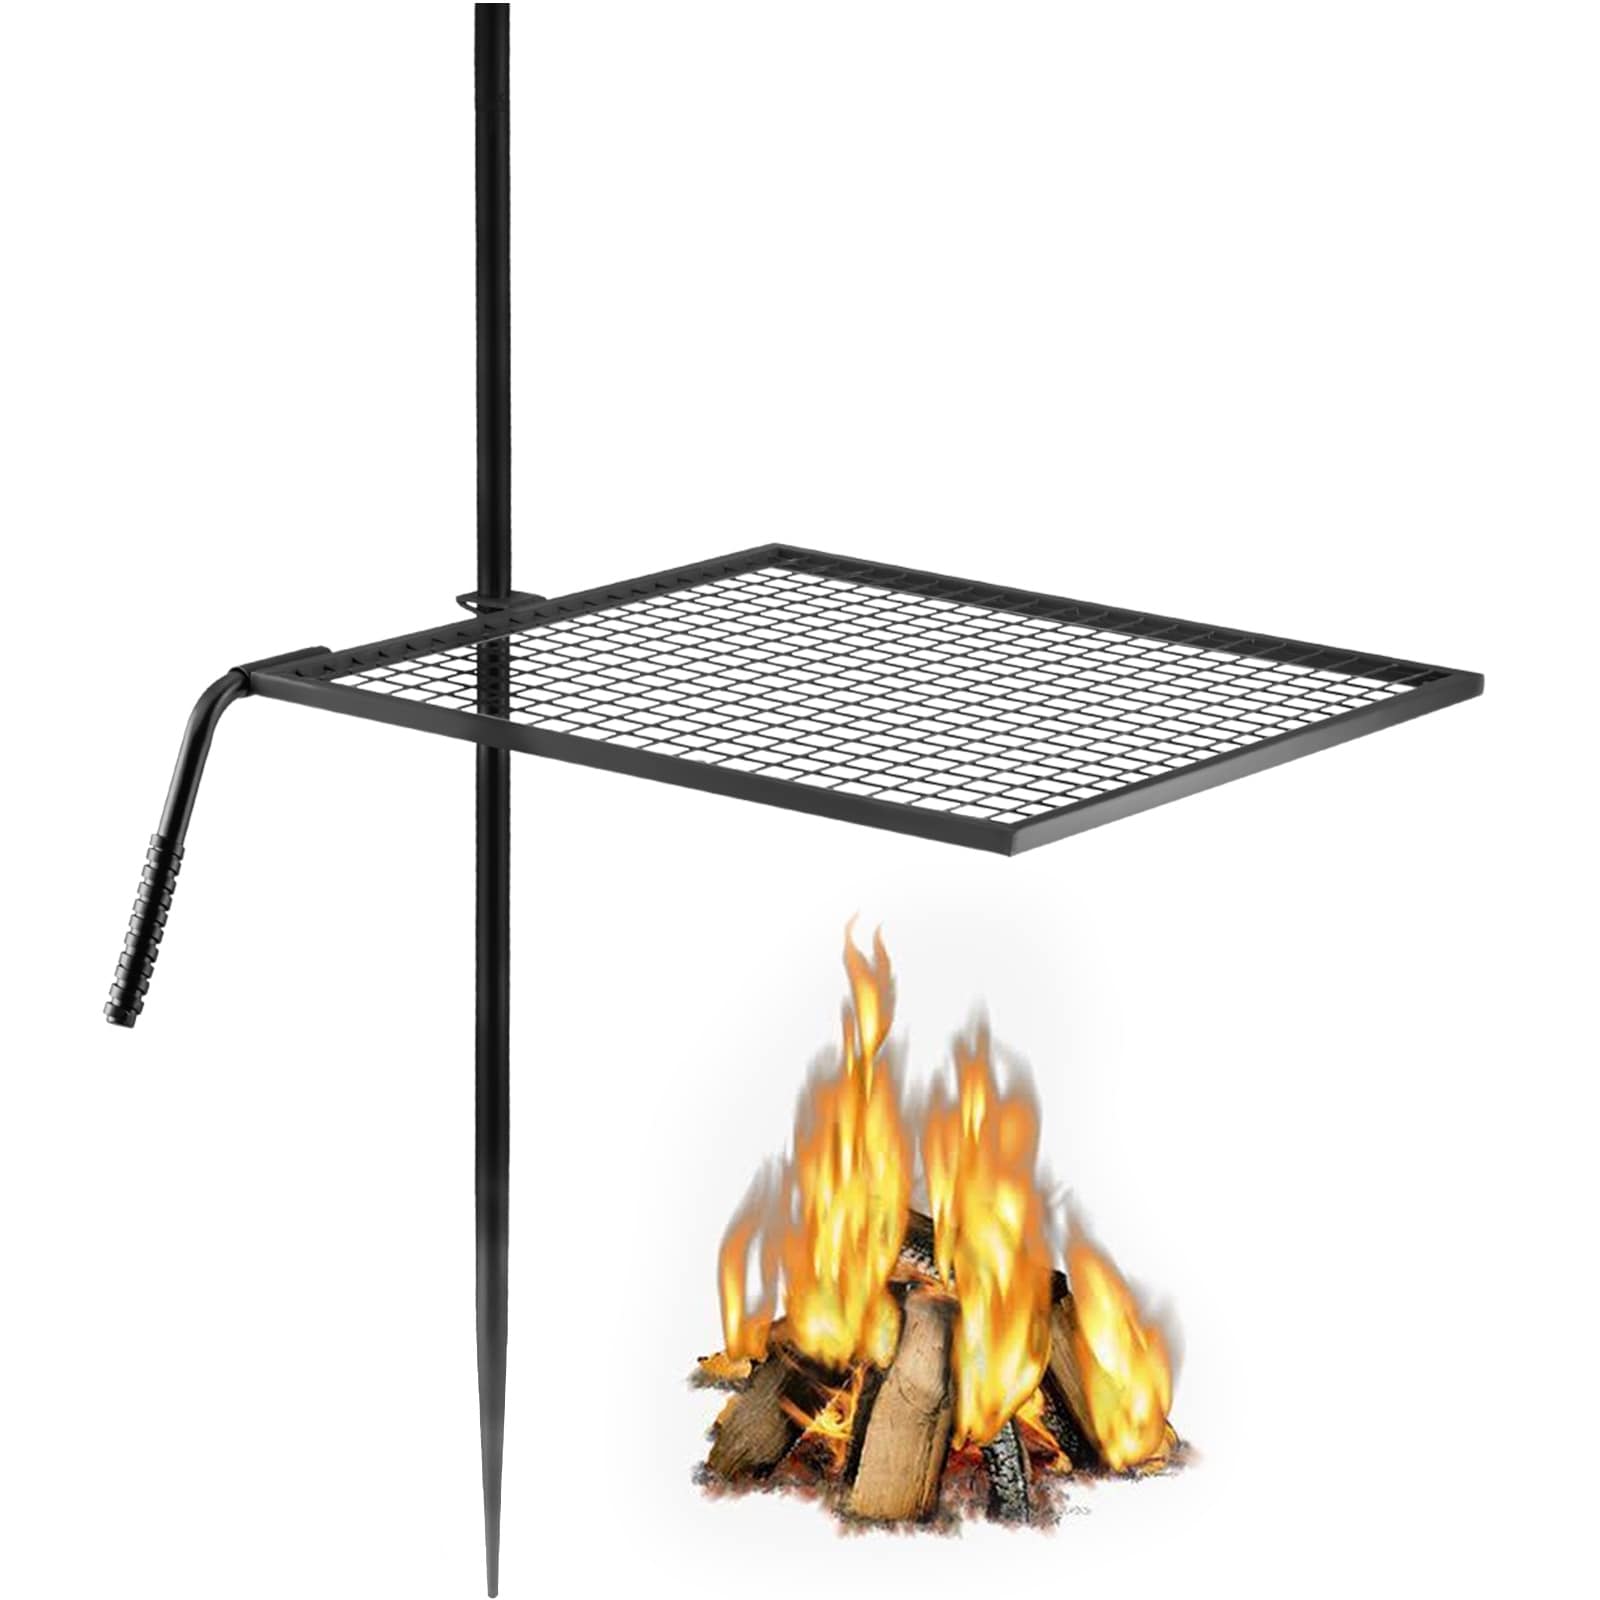 https://ak1.ostkcdn.com/images/products/is/images/direct/b5c4c46d7547e8665dd53470803f02a2072134f8/VEVOR-Swivel-Grill-Heavy-Duty-Steel-Campfire-Grill-Single-Layer-Open-Fire-Grill-with-Heat-Dissipation-Handle.jpg